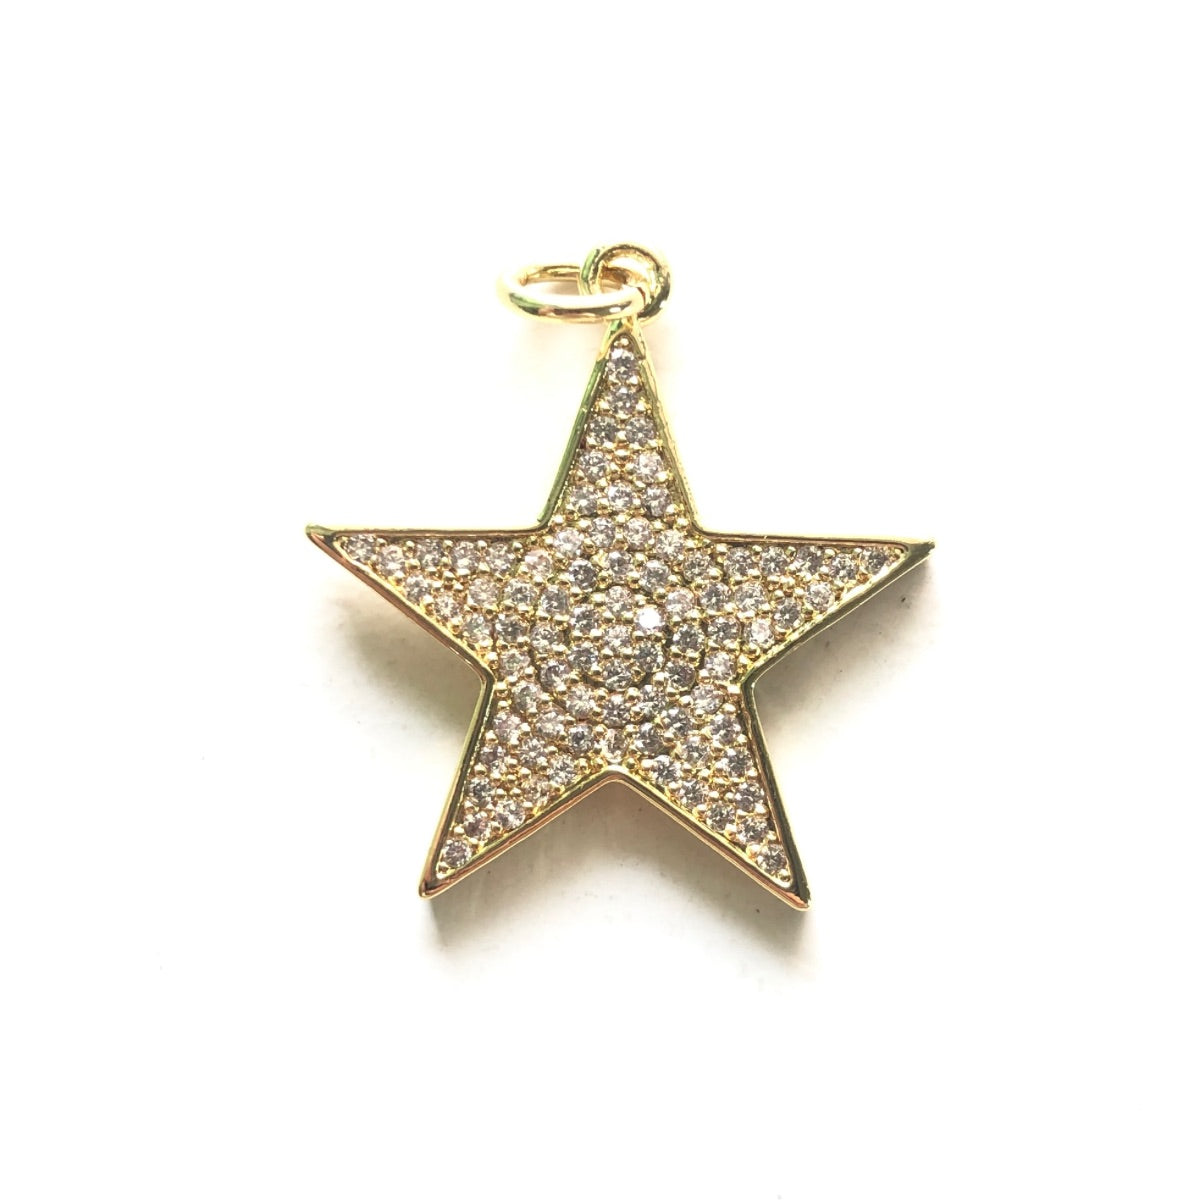 10pcs/lot 26.5*24.5mm CZ Paved Star Charms Gold CZ Paved Charms New Charms Arrivals Sun Moon Stars Charms Beads Beyond